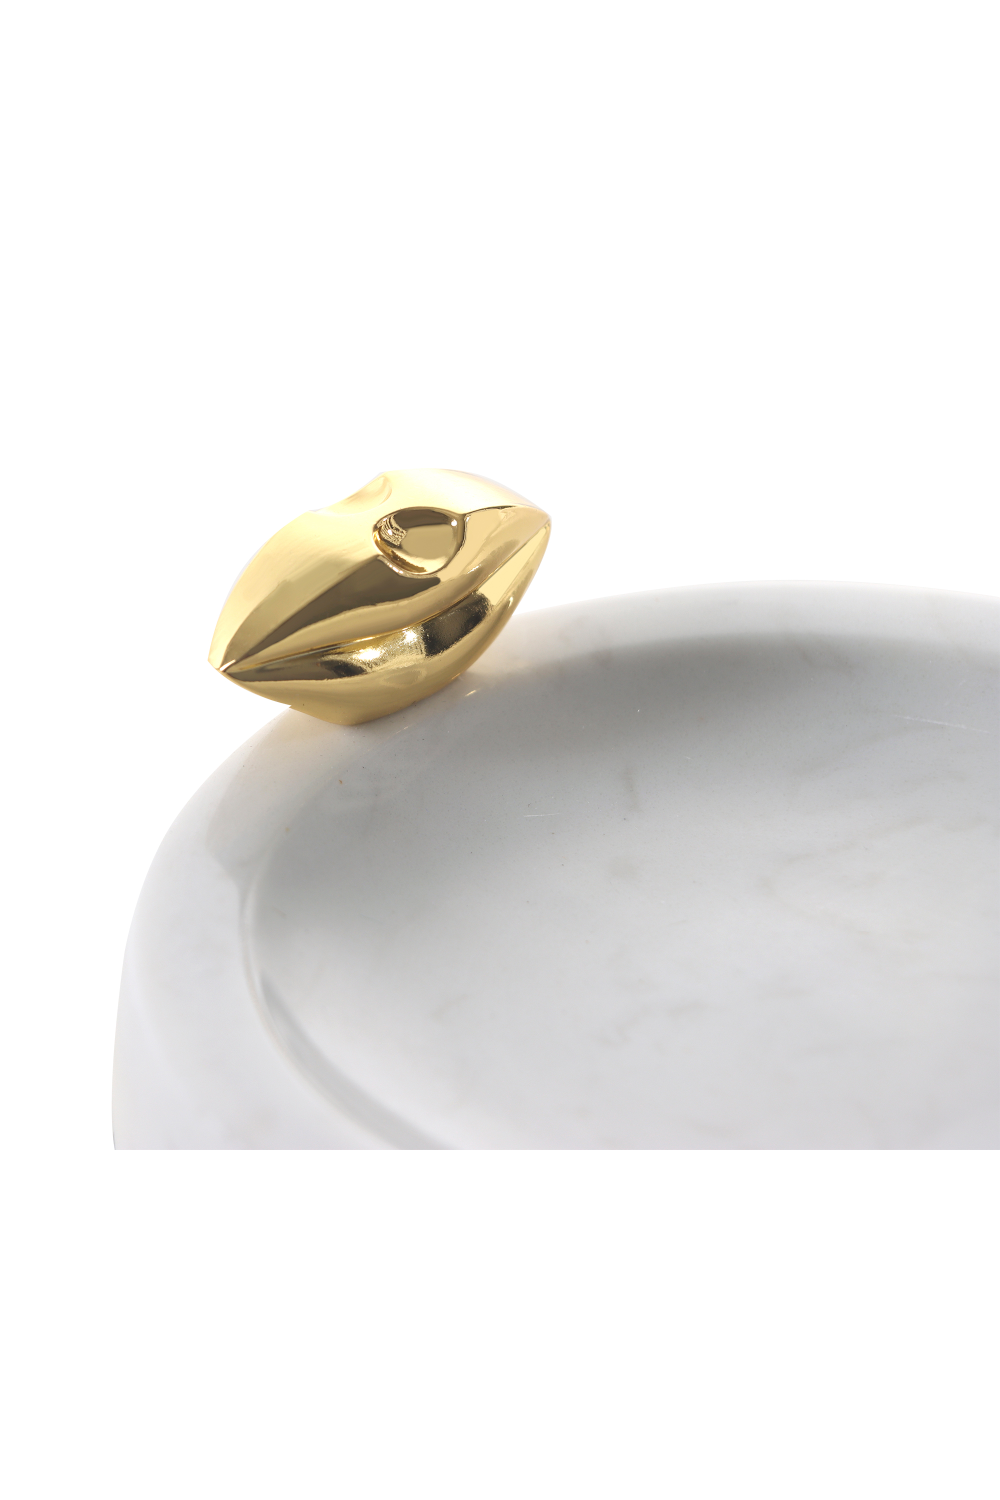 Round White Marble Ash Tray | Liang & Eimil Boswell | Oroa.com